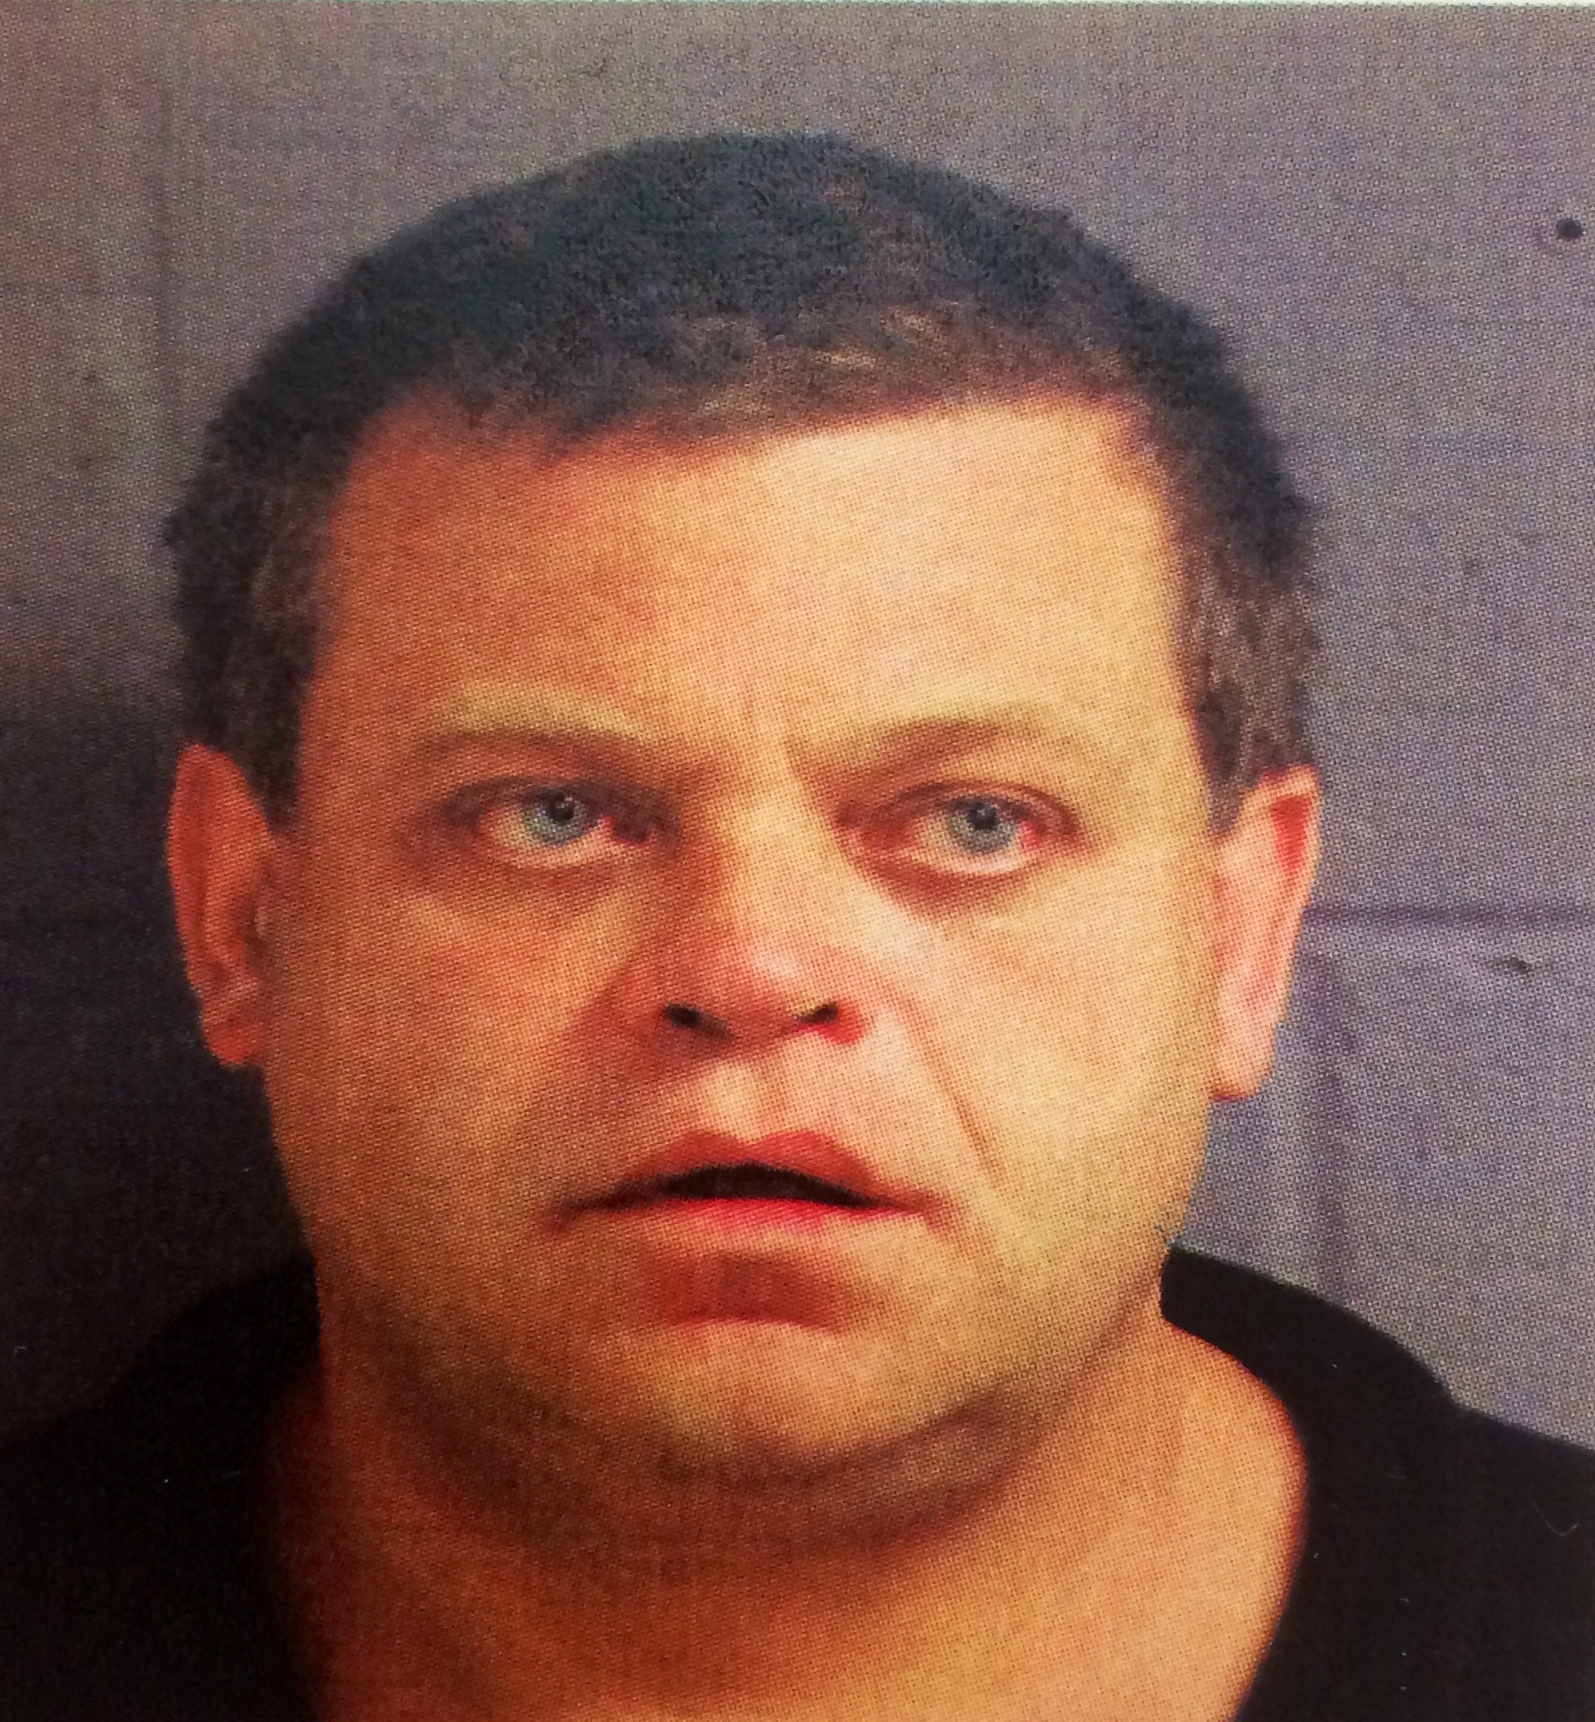 Convicted drug dealer Christopher Vanguilder of Saratoga County gets 10 years in prison for selling crack/cocaine.